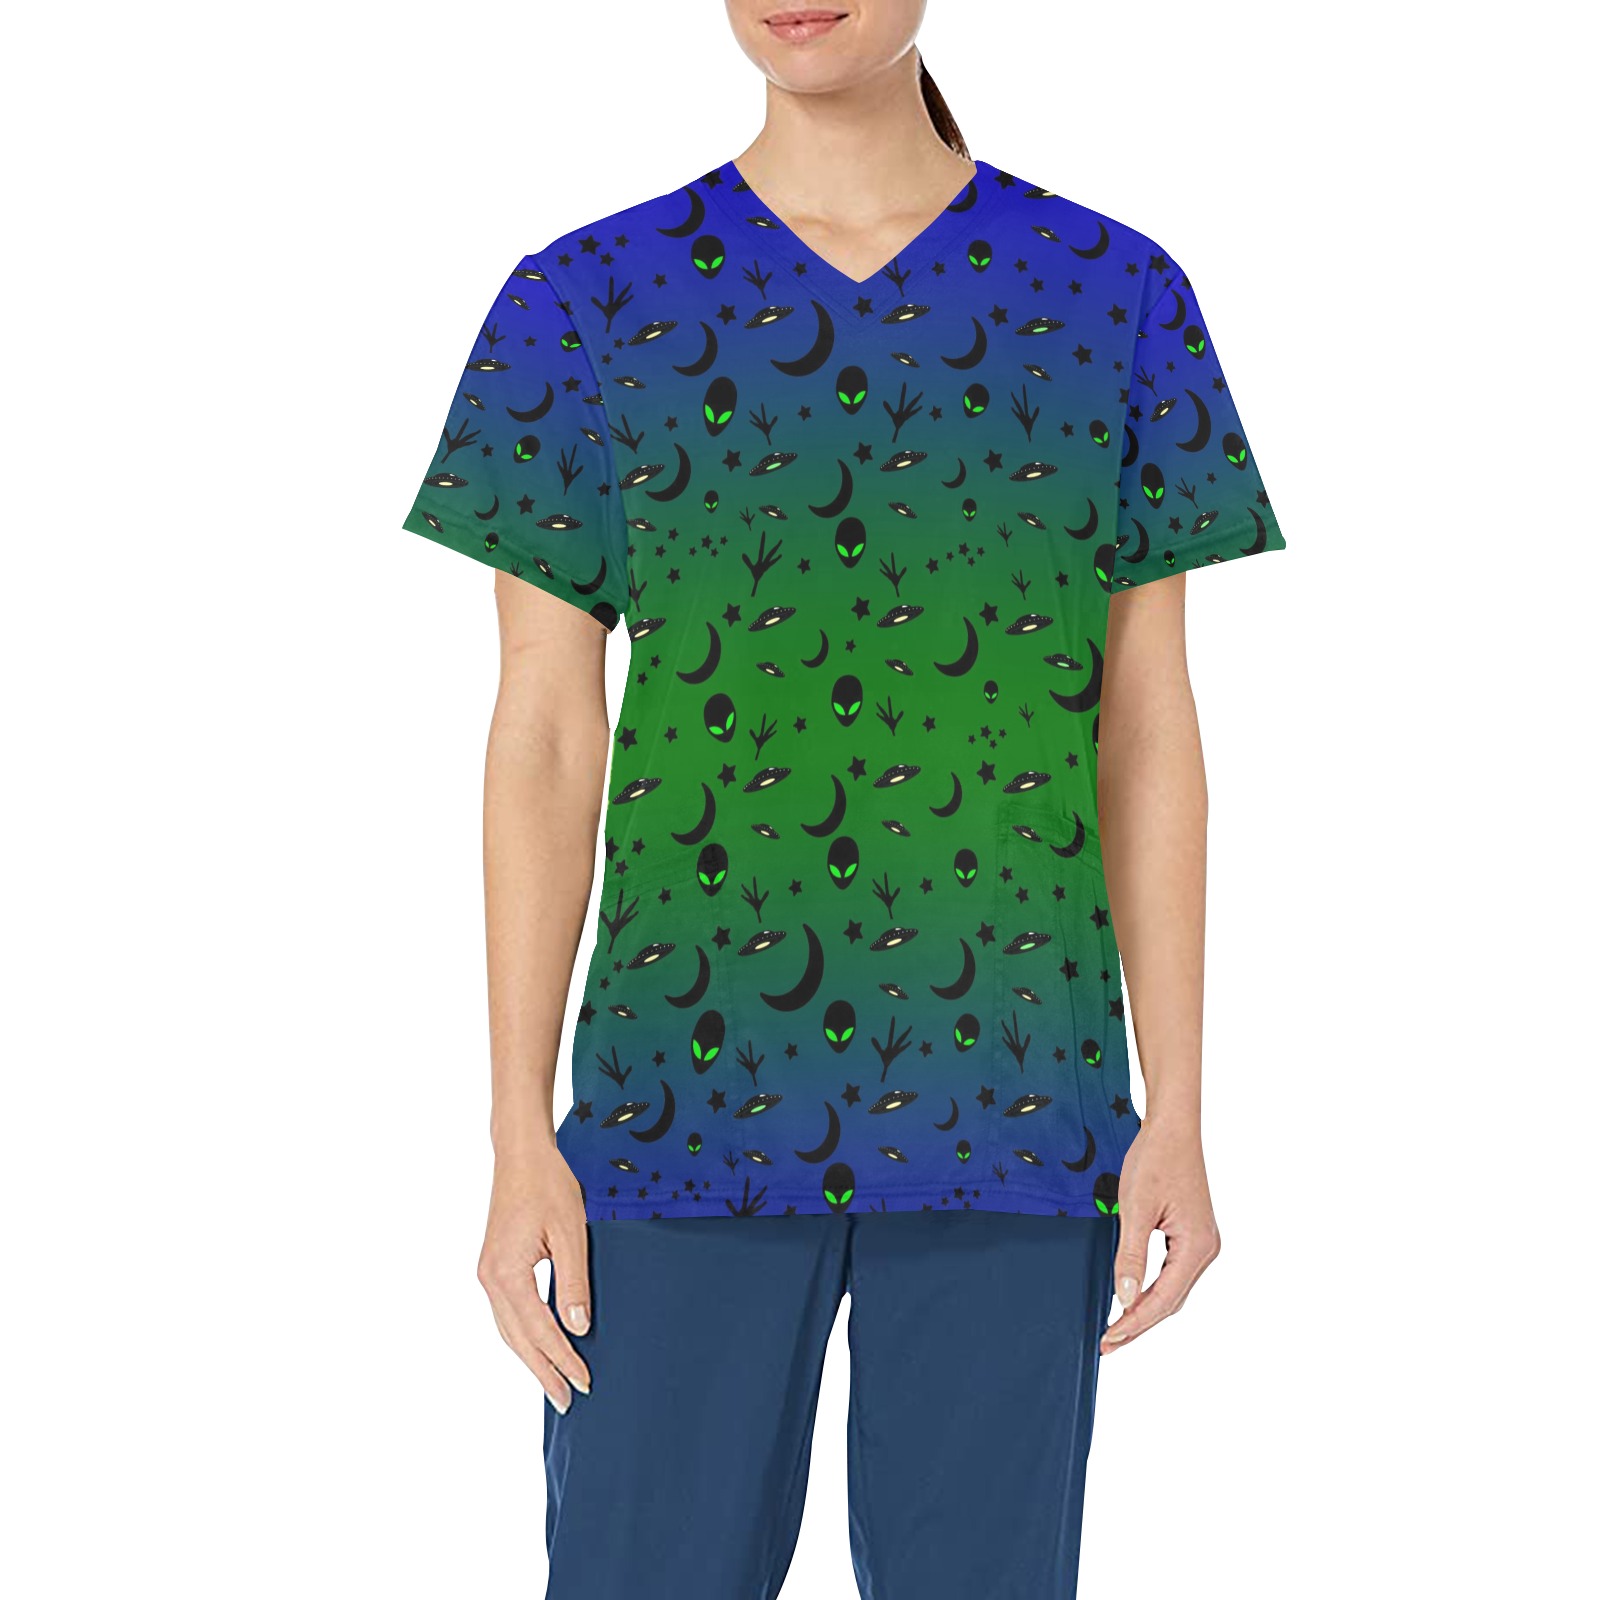 Aliens and Spaceships - Blue / Green All Over Print Scrub Top